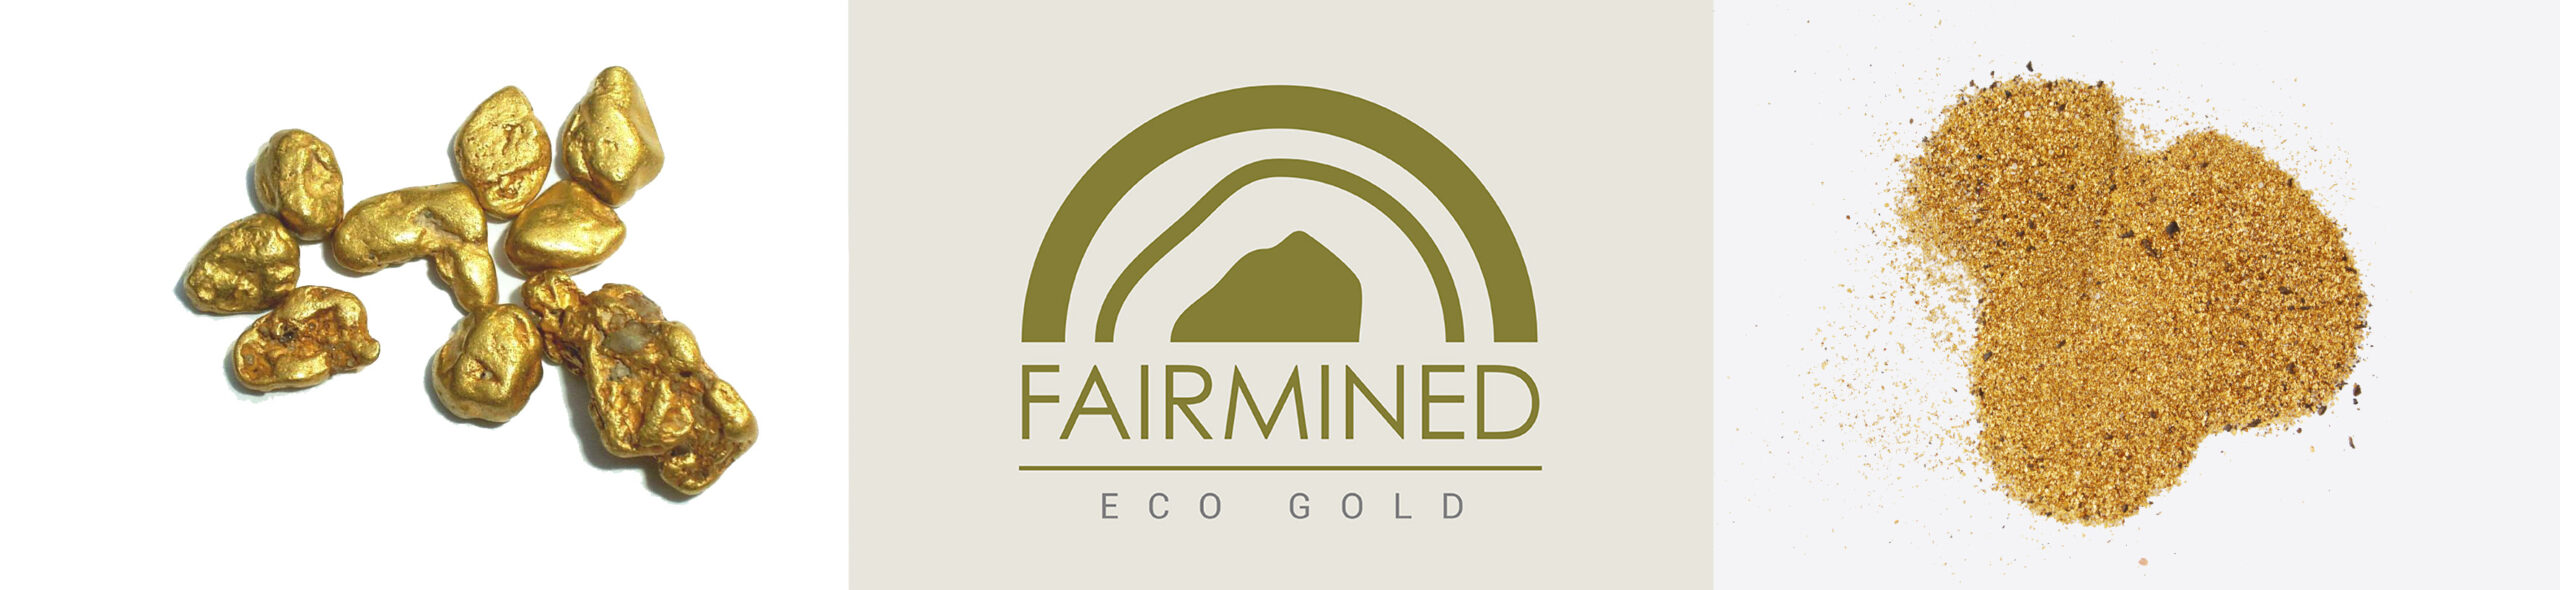 FAIRMINED ECO GOLD Label